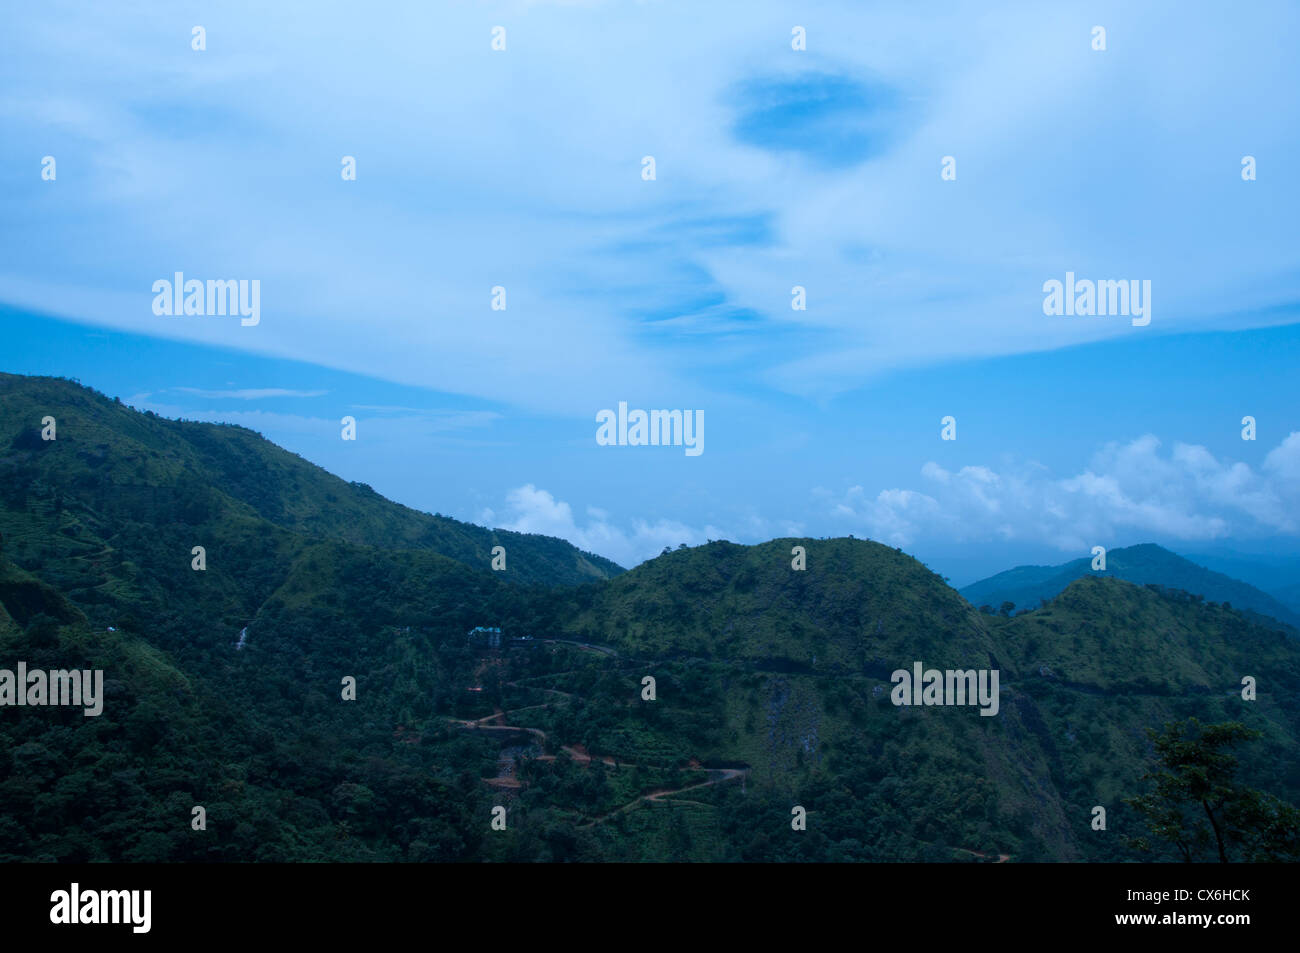 Hills surrounded by clouds, western ghats kerala india Stock Photo